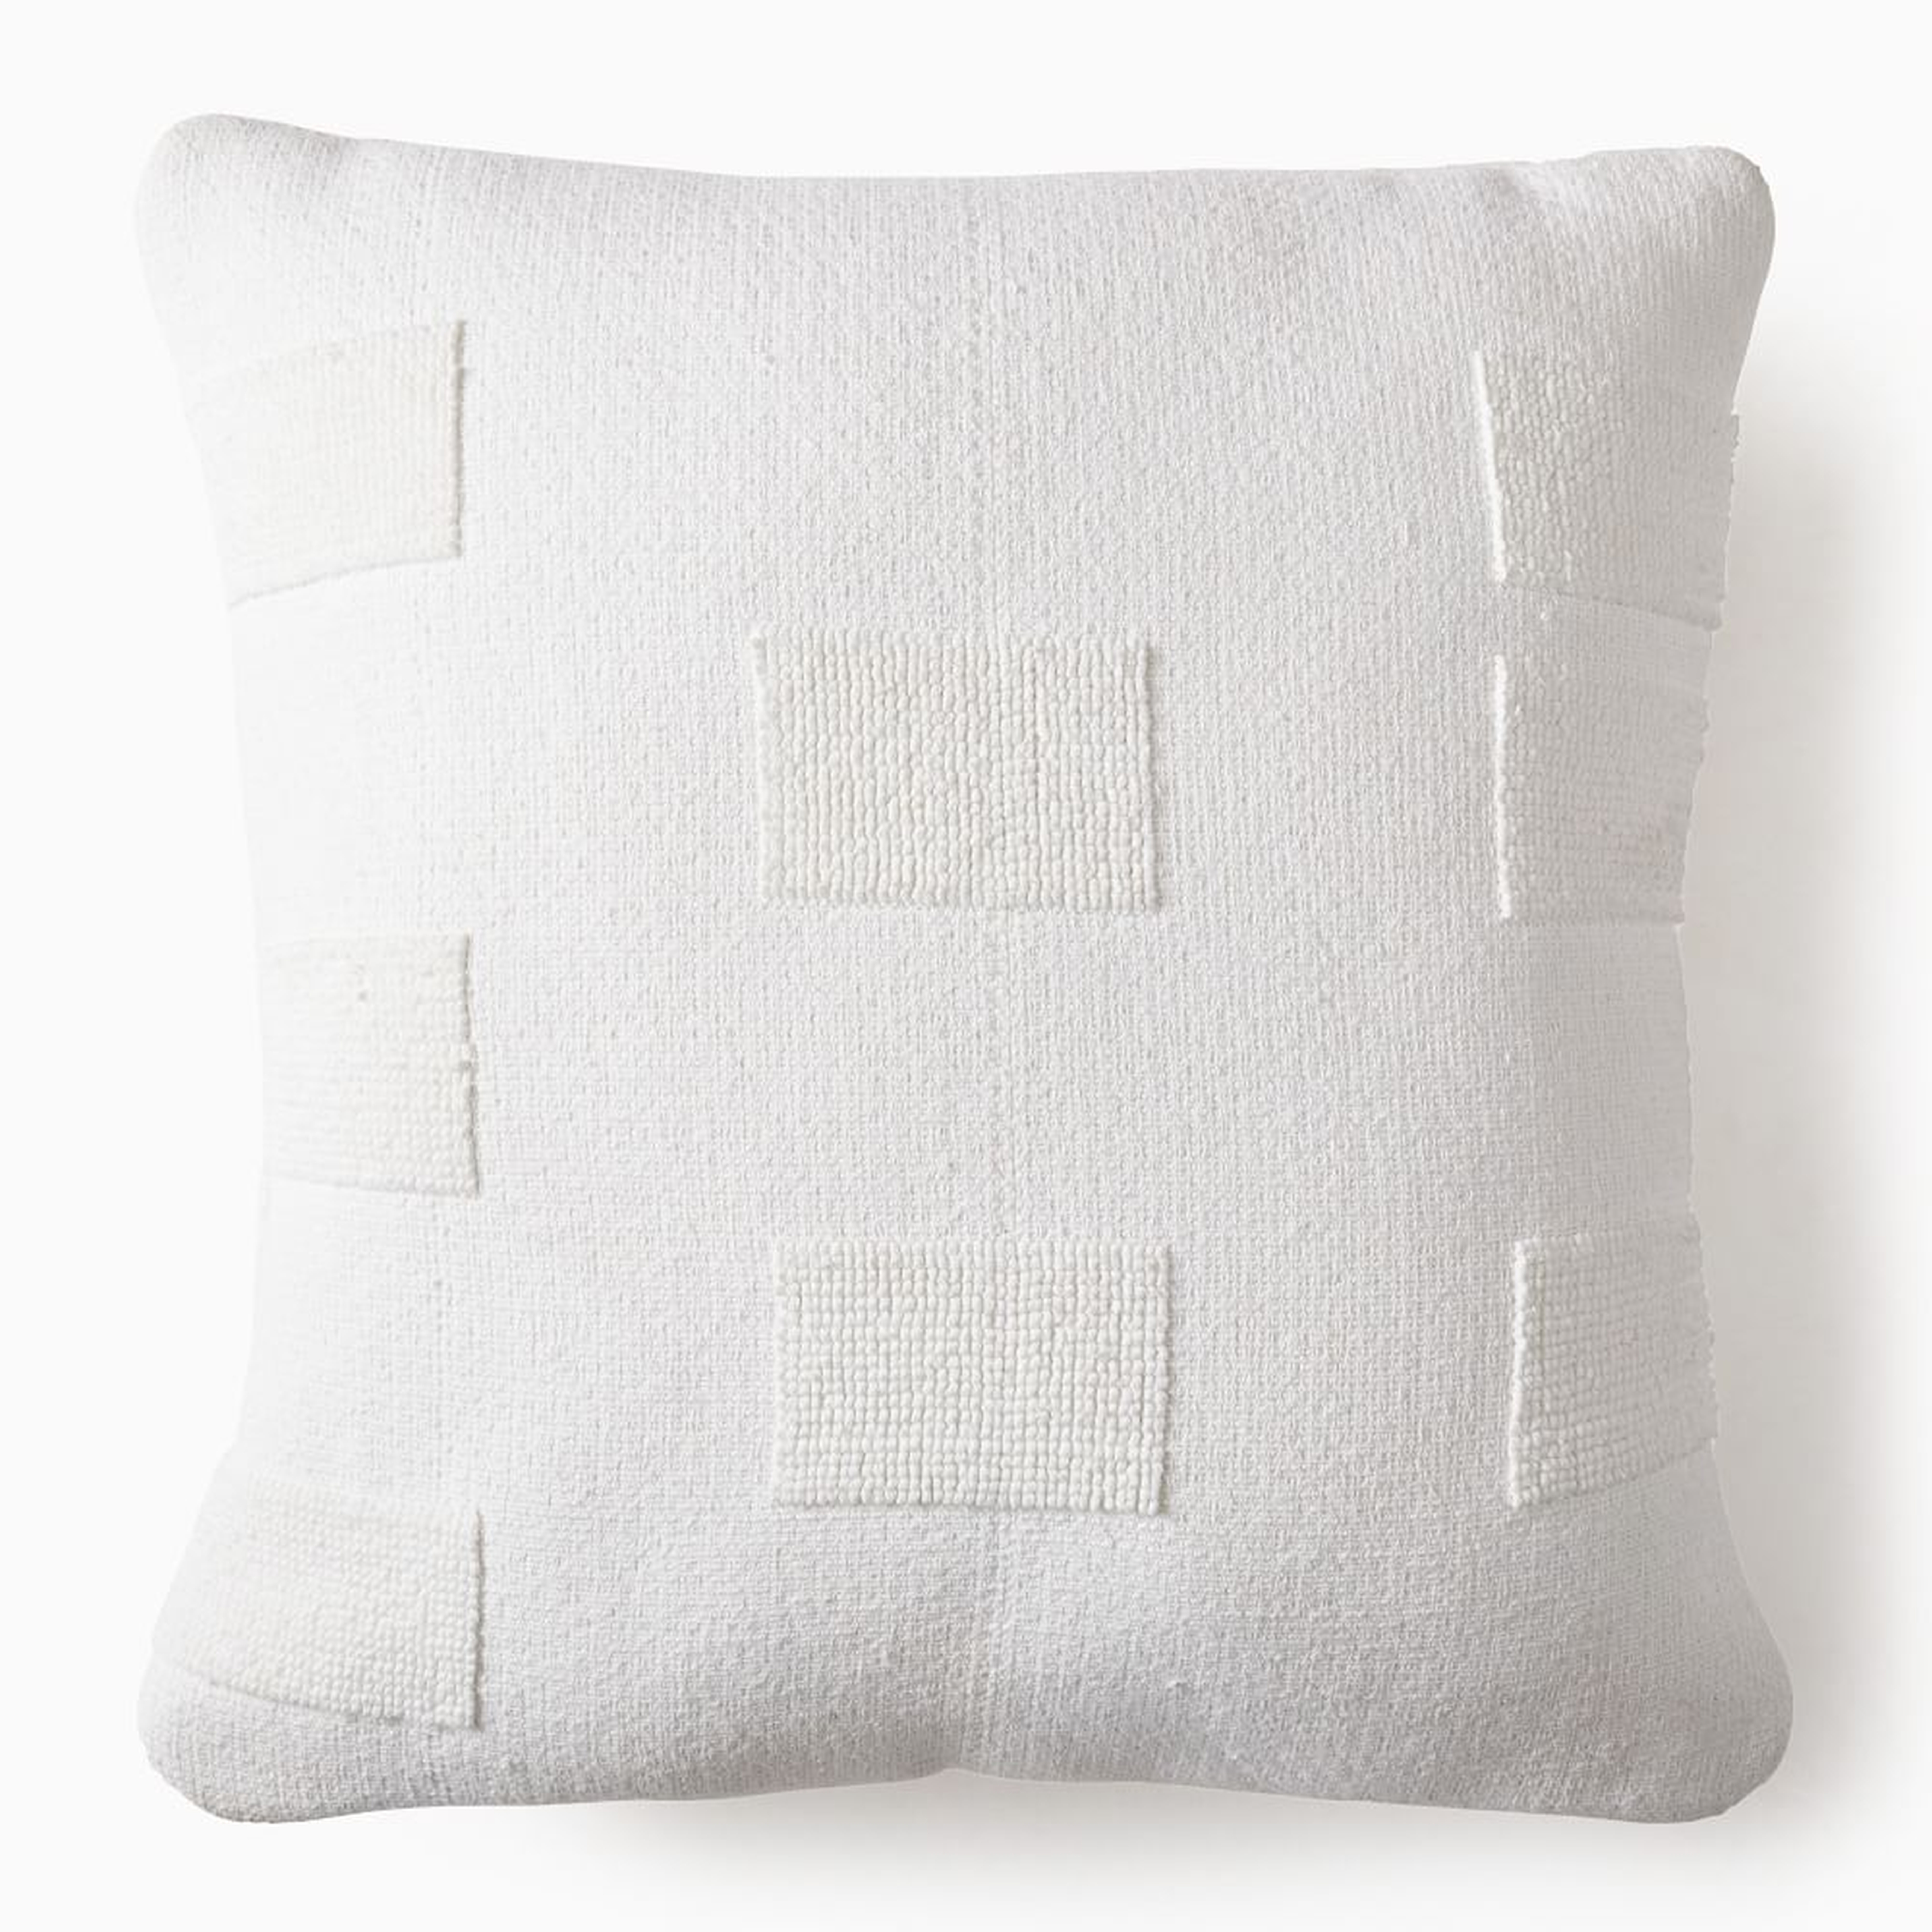 Outdoor Tufted Pillow, 24"x24", White - West Elm